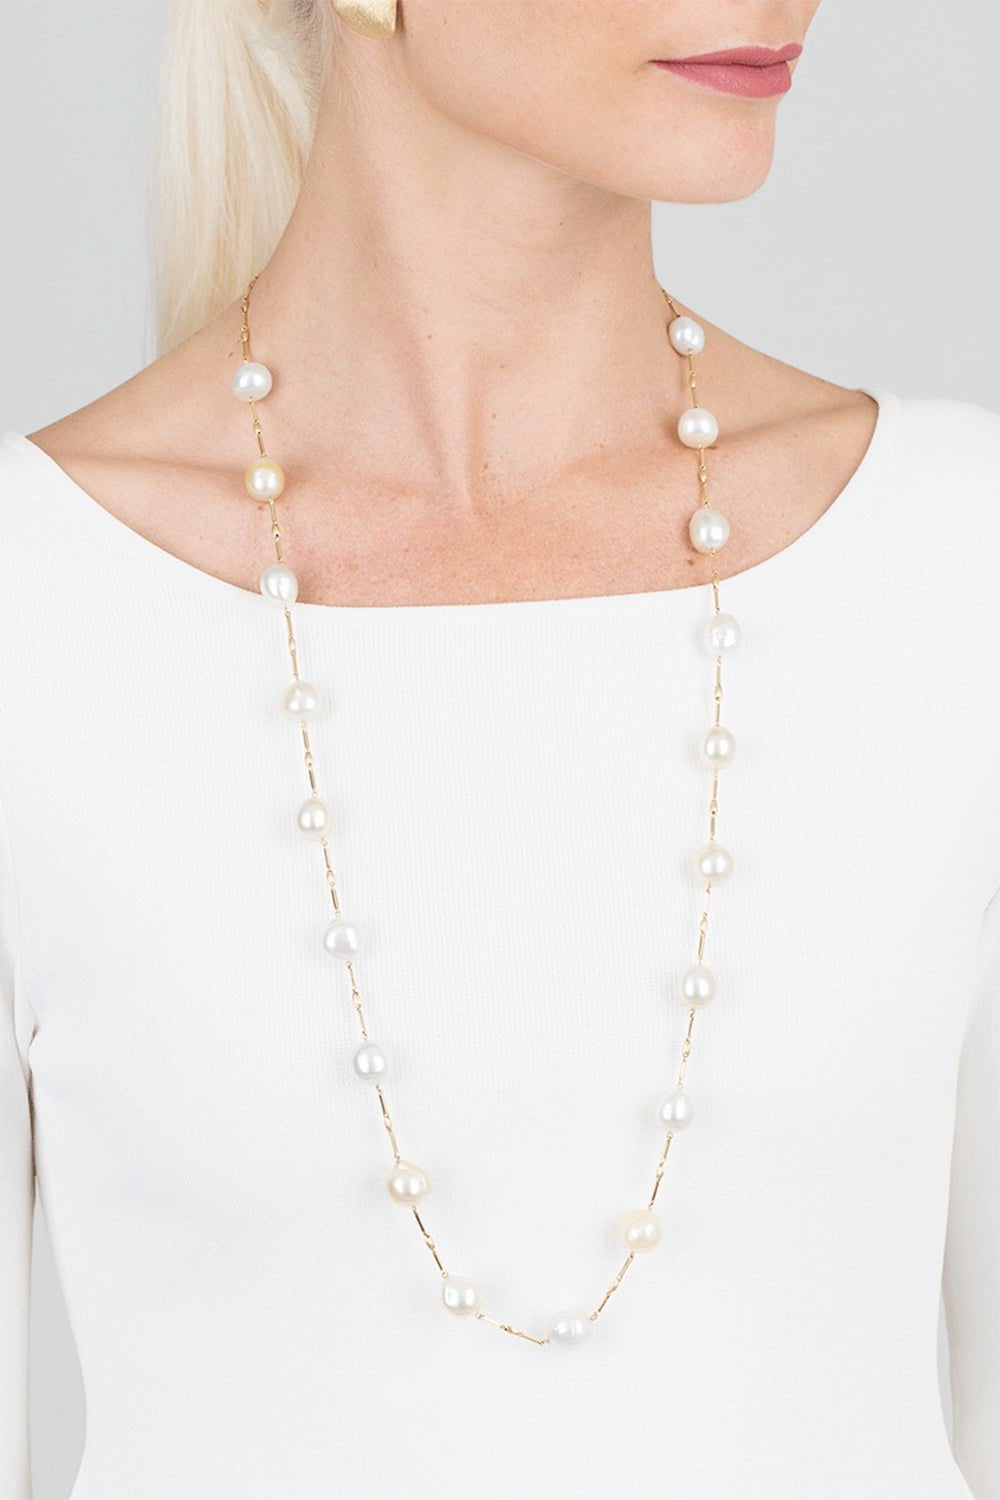 YVEL-South Sea Pearl Station Necklace-YELLOW GOLD